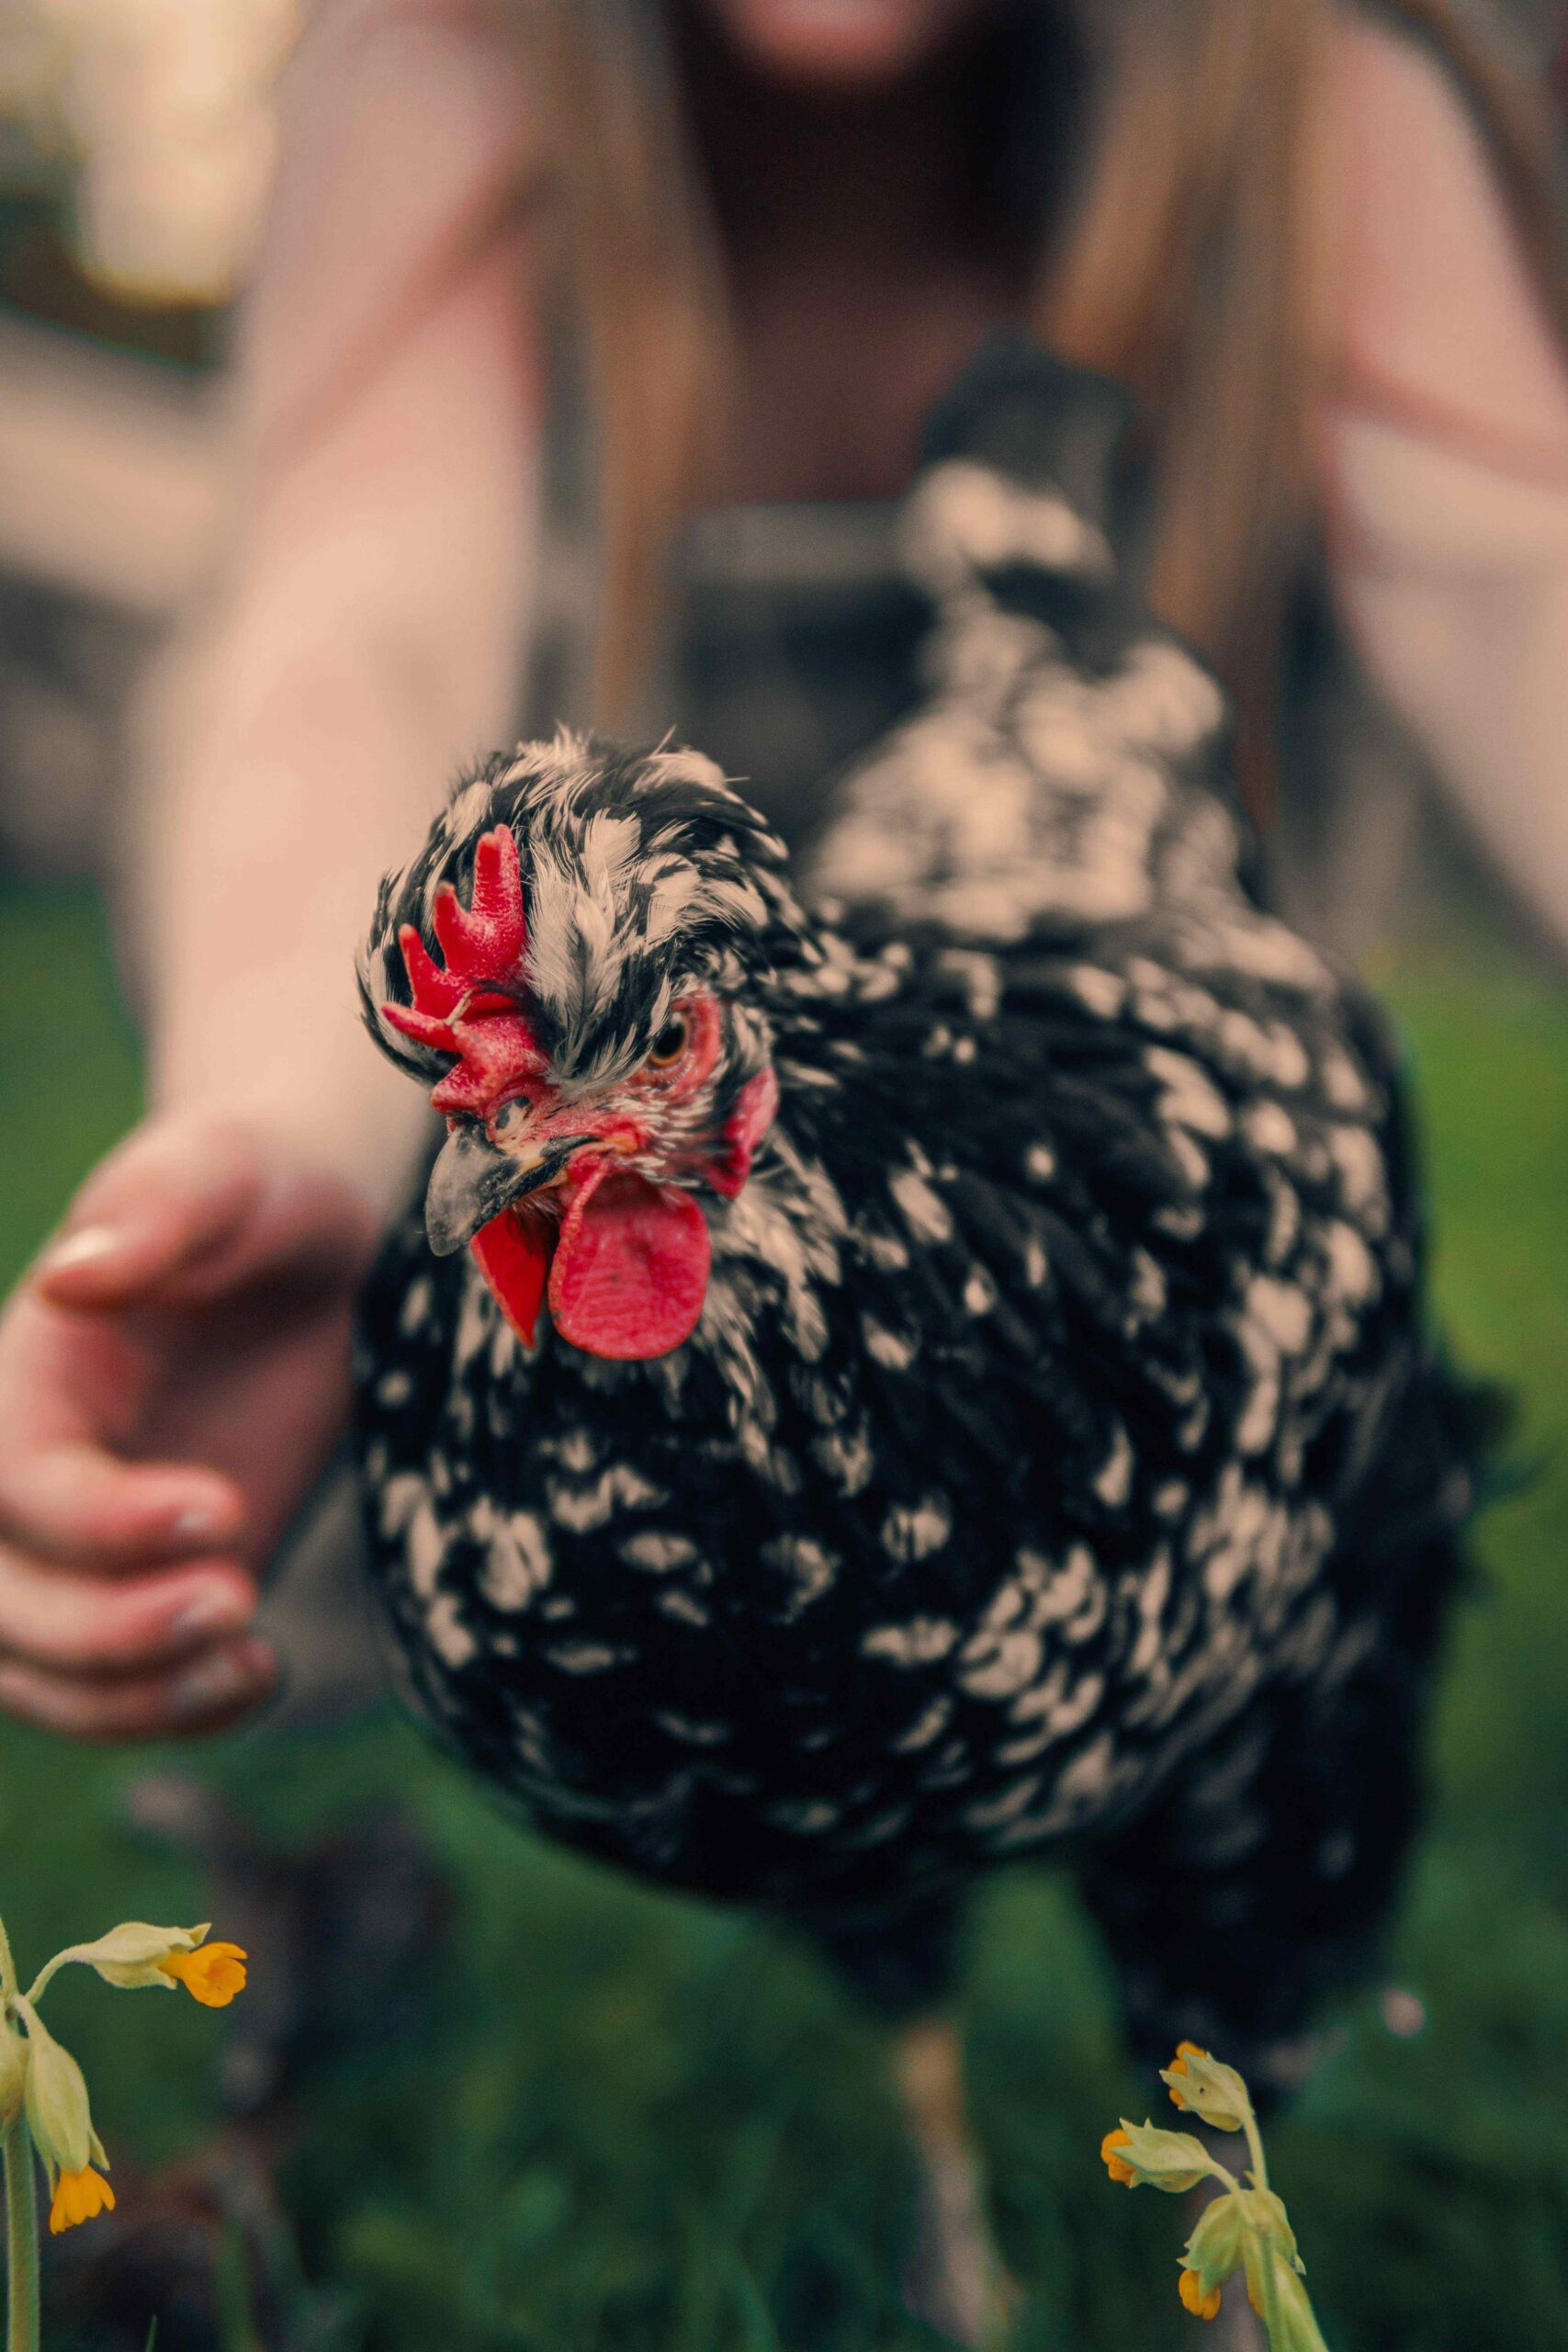 https://blog.omlet.co.uk/wp-content/uploads/sites/9/2020/11/A-girl-catching-a-black-and-white-chicken-scaled.jpg